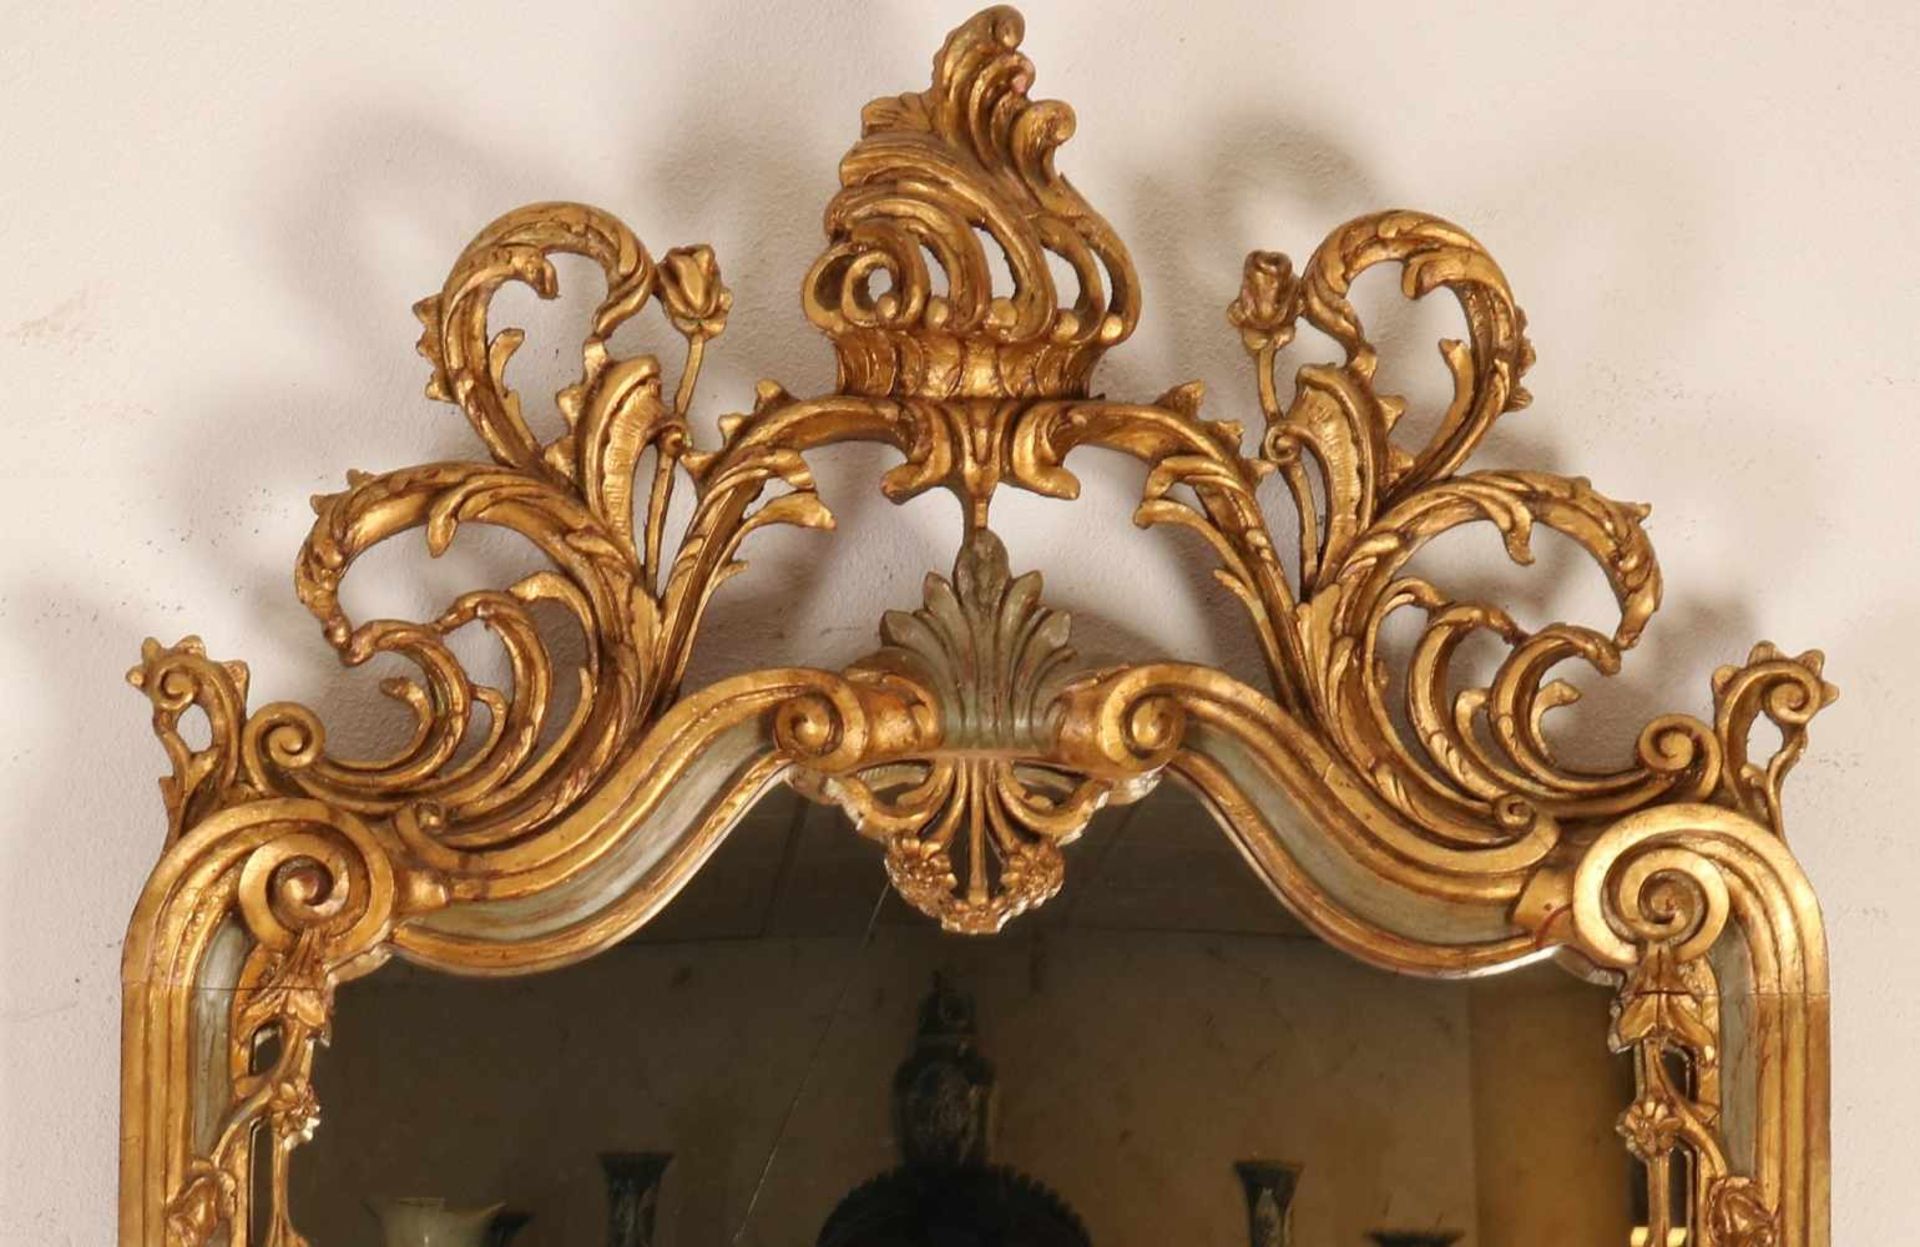 Great Italian gilt wood mirror with console stabbed. Rococo-style. 20th century. Crack in glass.